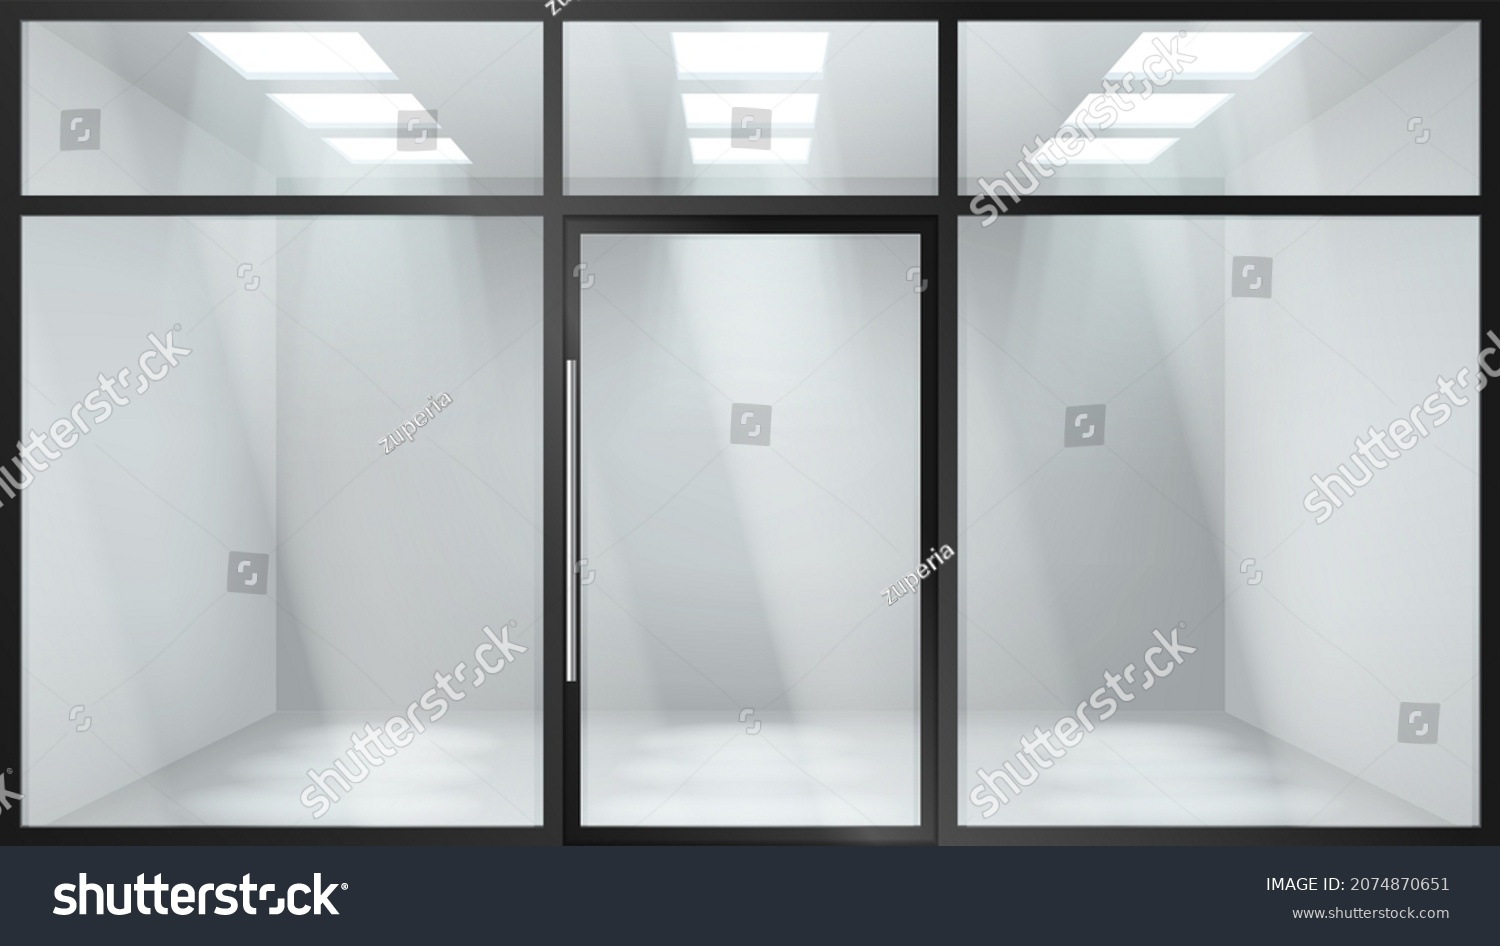 Glass entrance door. Shopping center mall entrance automatic doors with reflection and black frame. Store facade with storefront and exhibition lights. Realistic vector illustration #2074870651